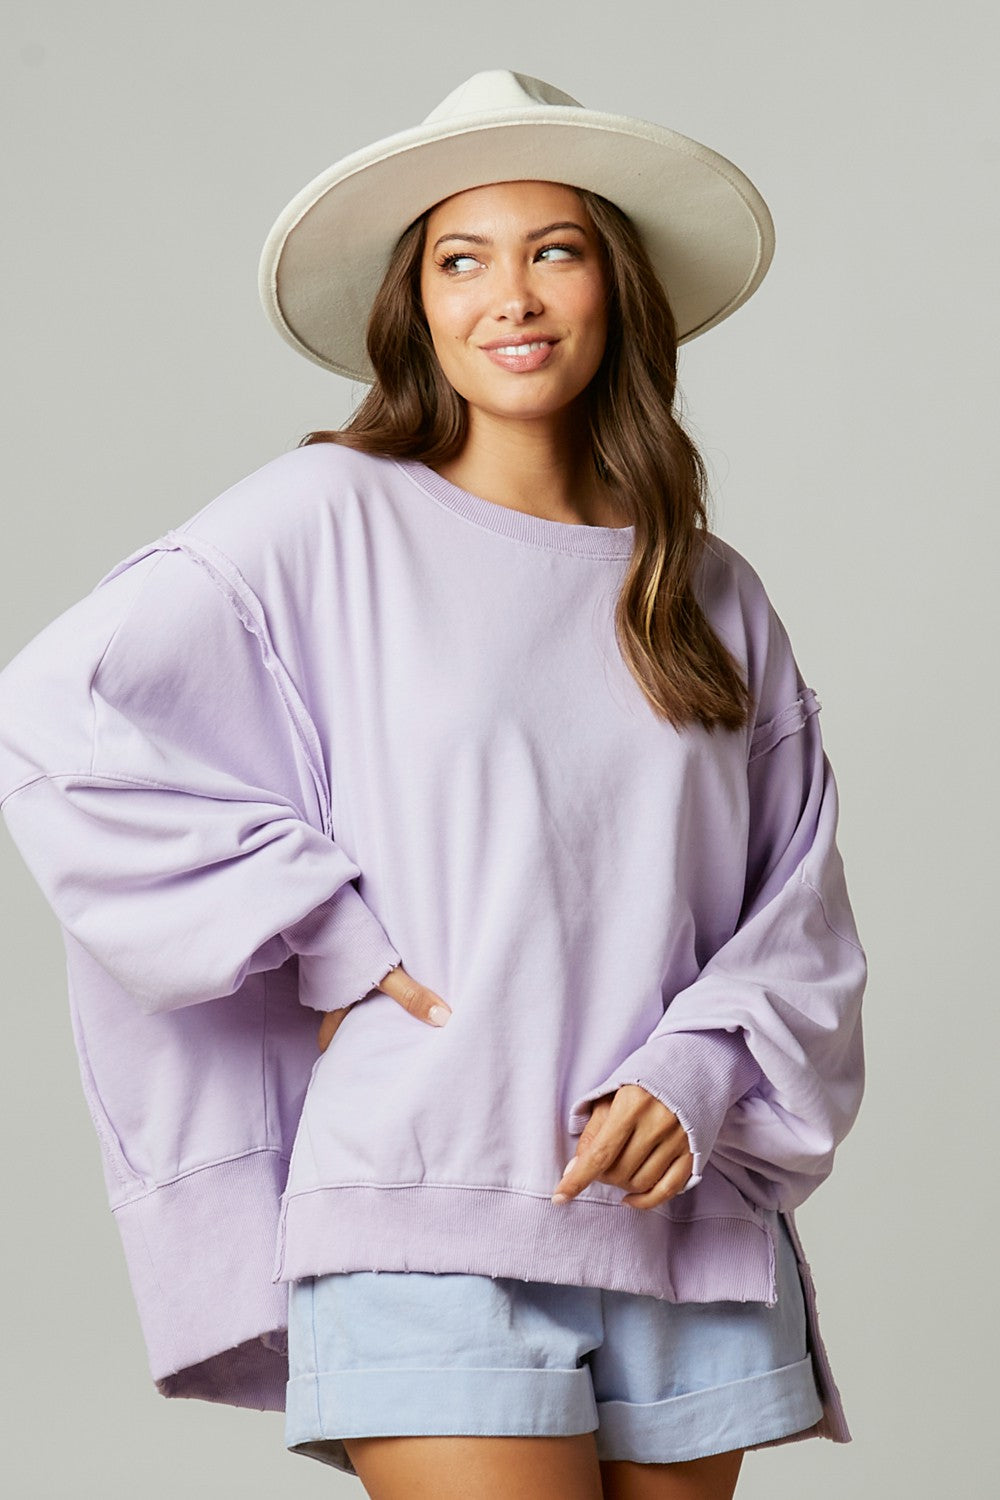 Fantastic Fawn French Terry Oversize Sweatshirt in Lavender  Fantastic Fawn   